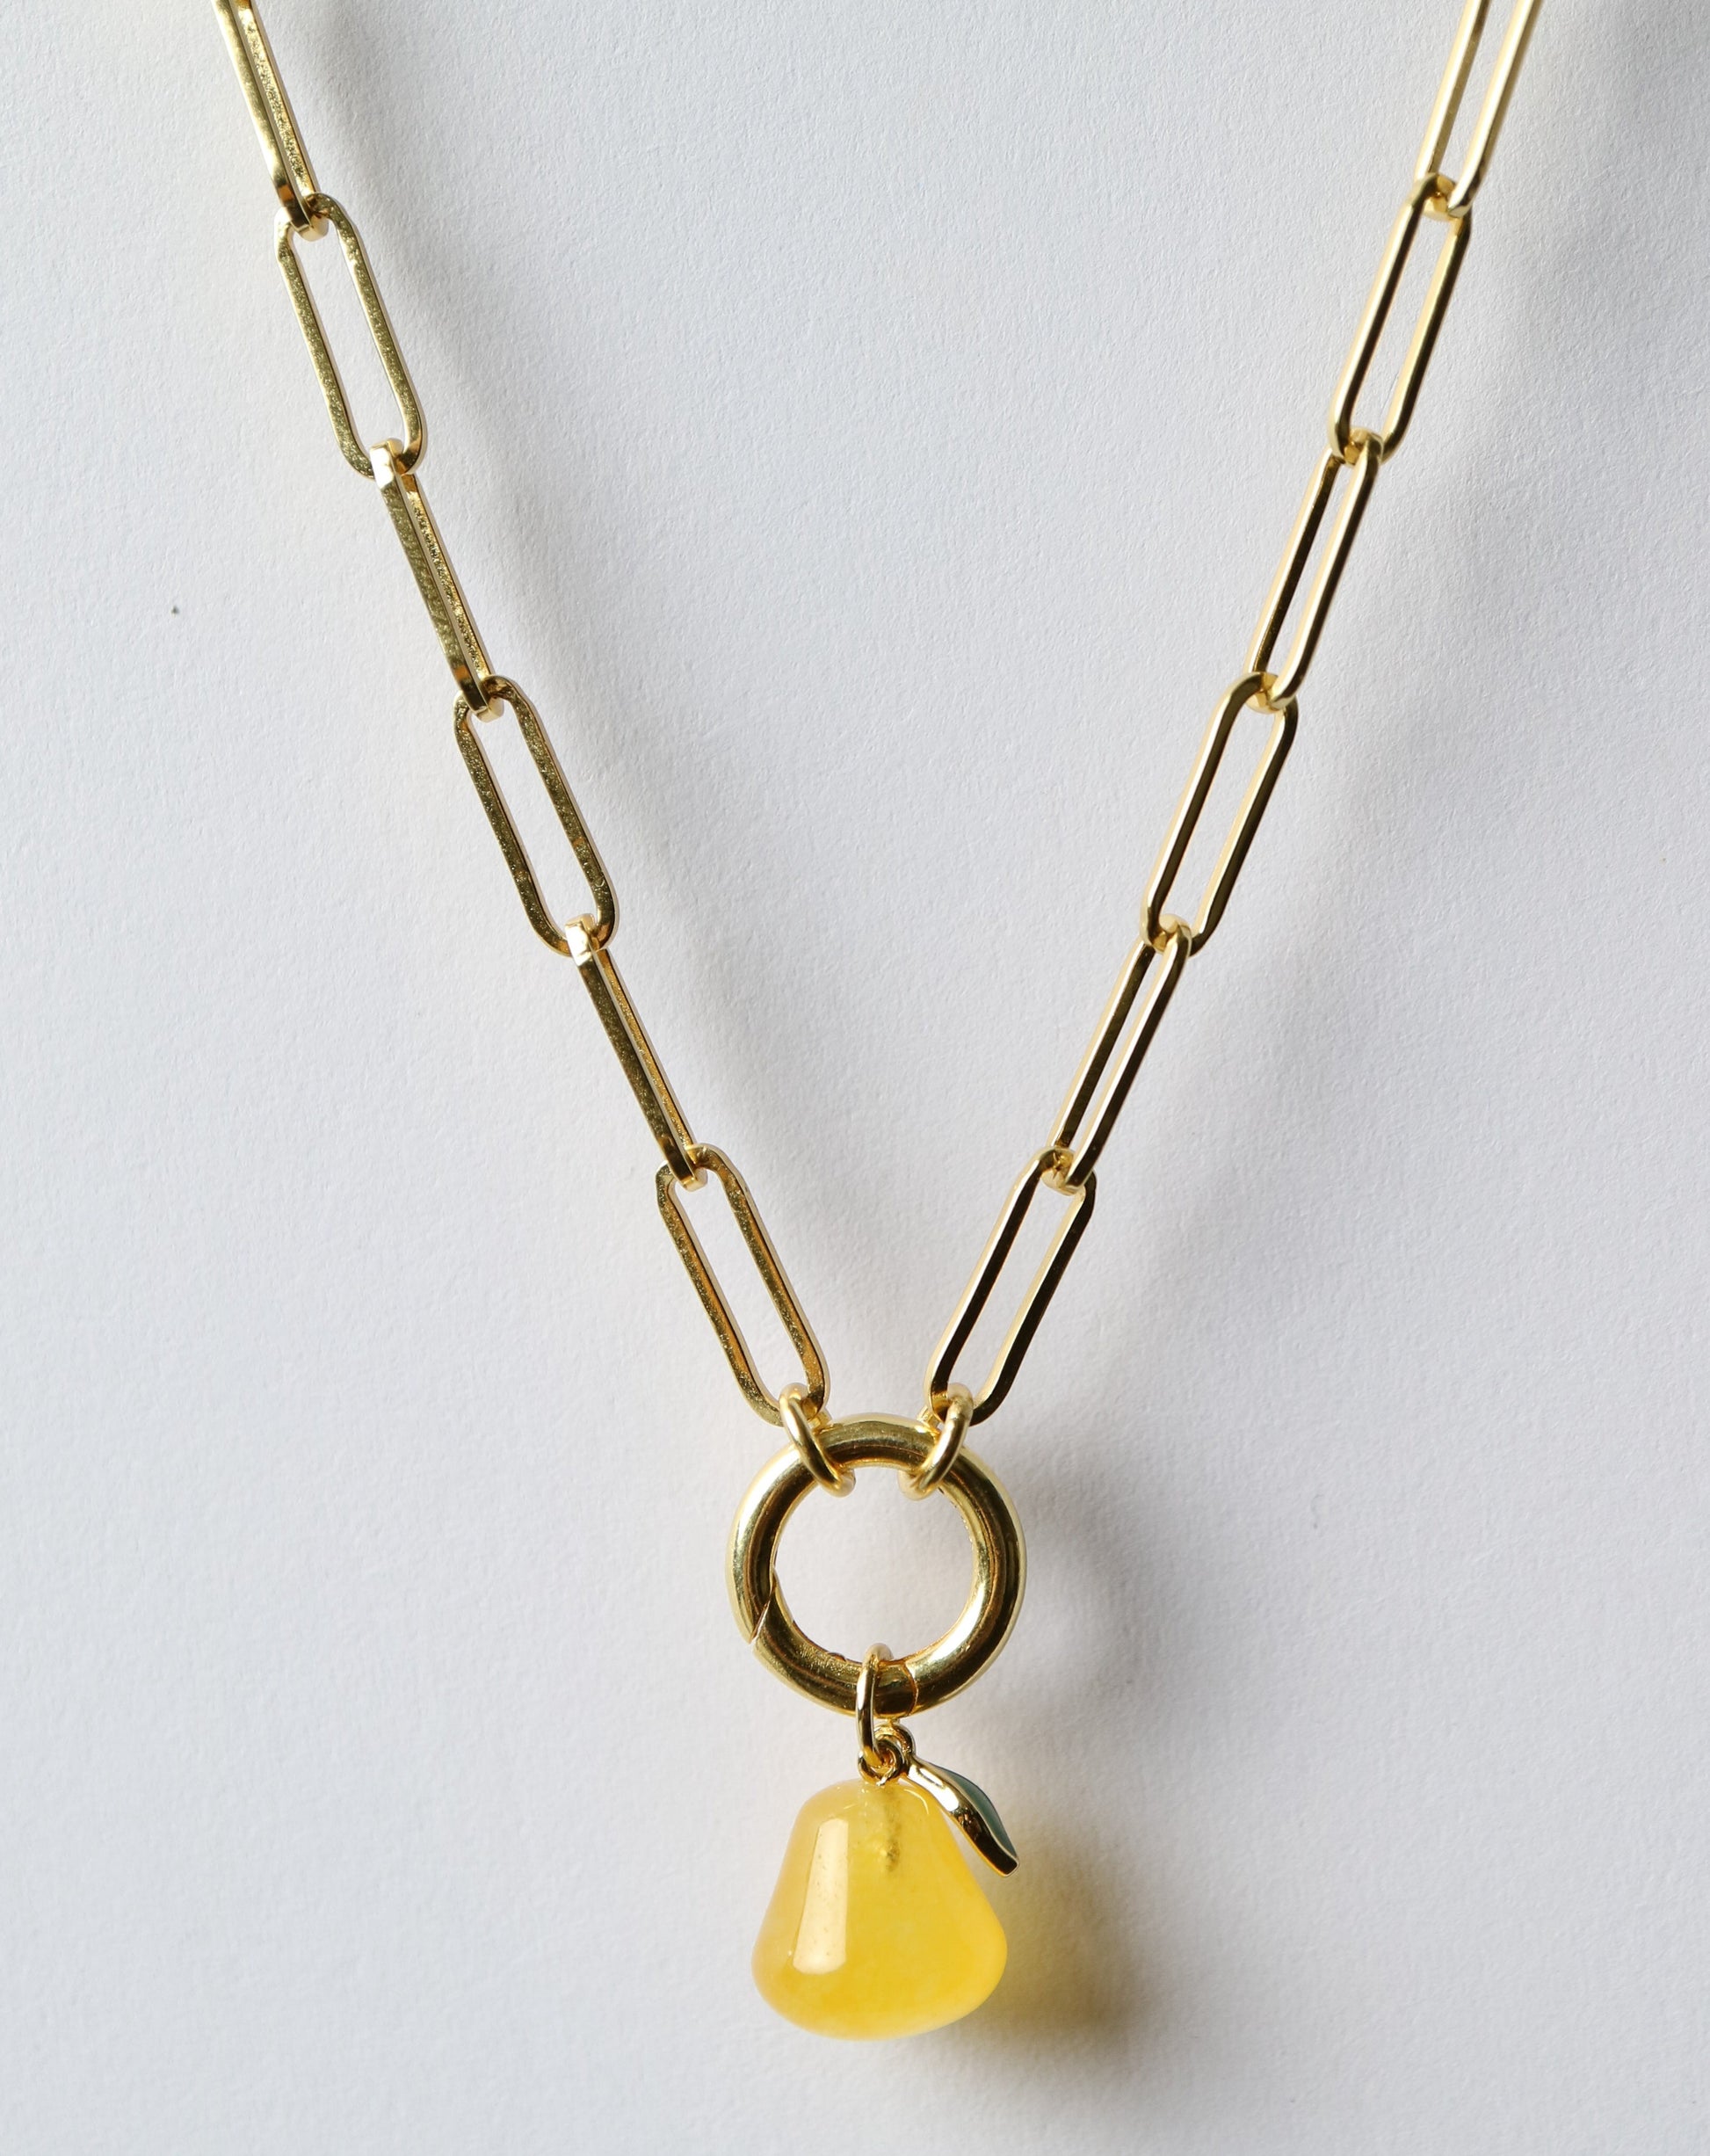 Gold Paperclip Necklace with lemon charm